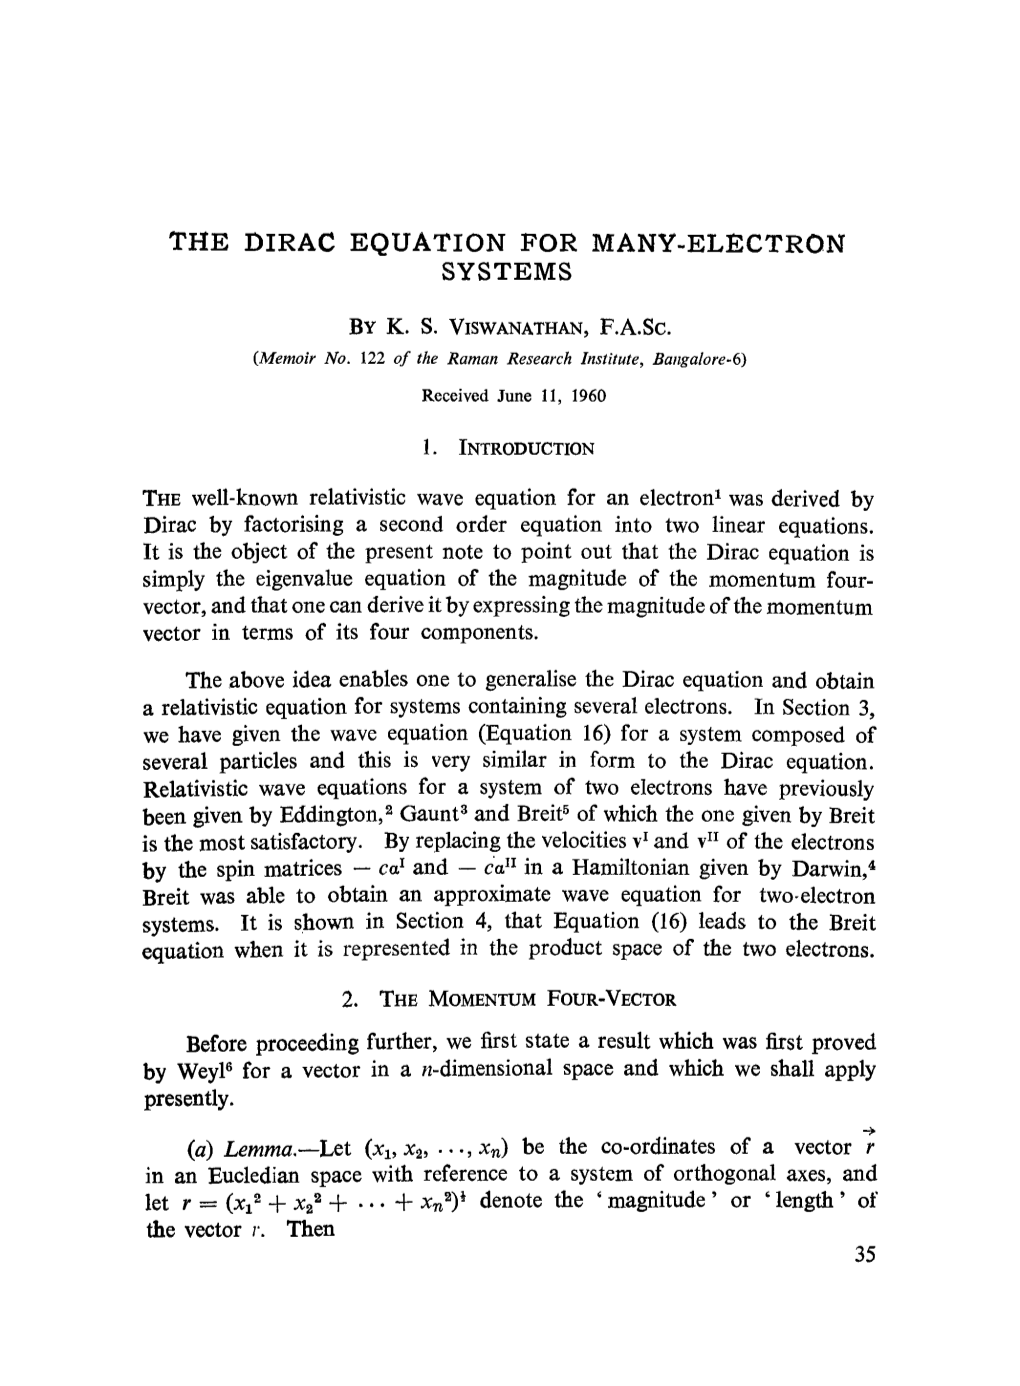 The Dirac Equation for Many-Electron Systems